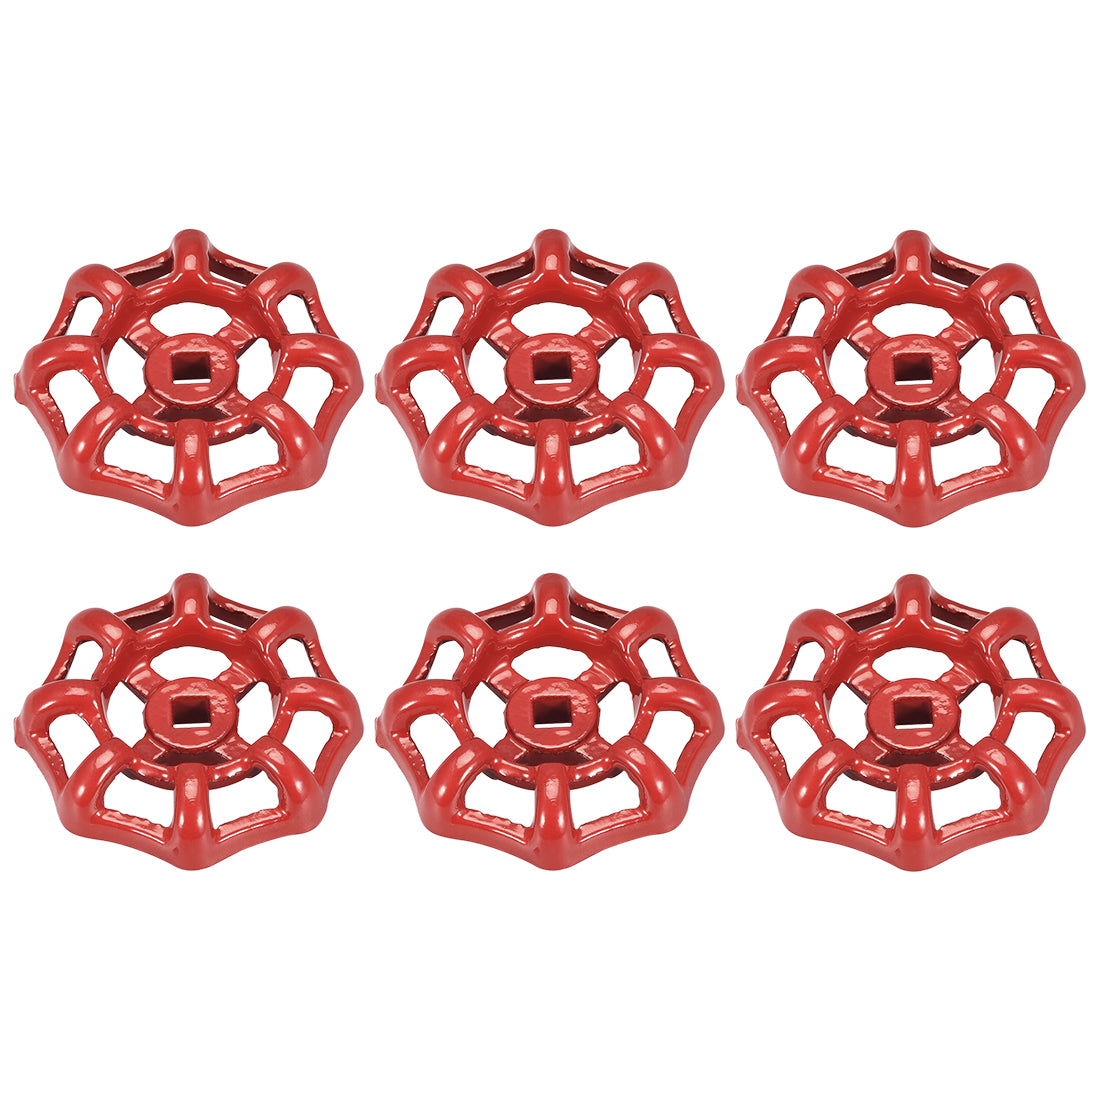 Uxcell Uxcell Round Wheel Handle, Square Broach 7x7mm, Wheel OD 63mm Paint Cast Steel Red 6Pcs